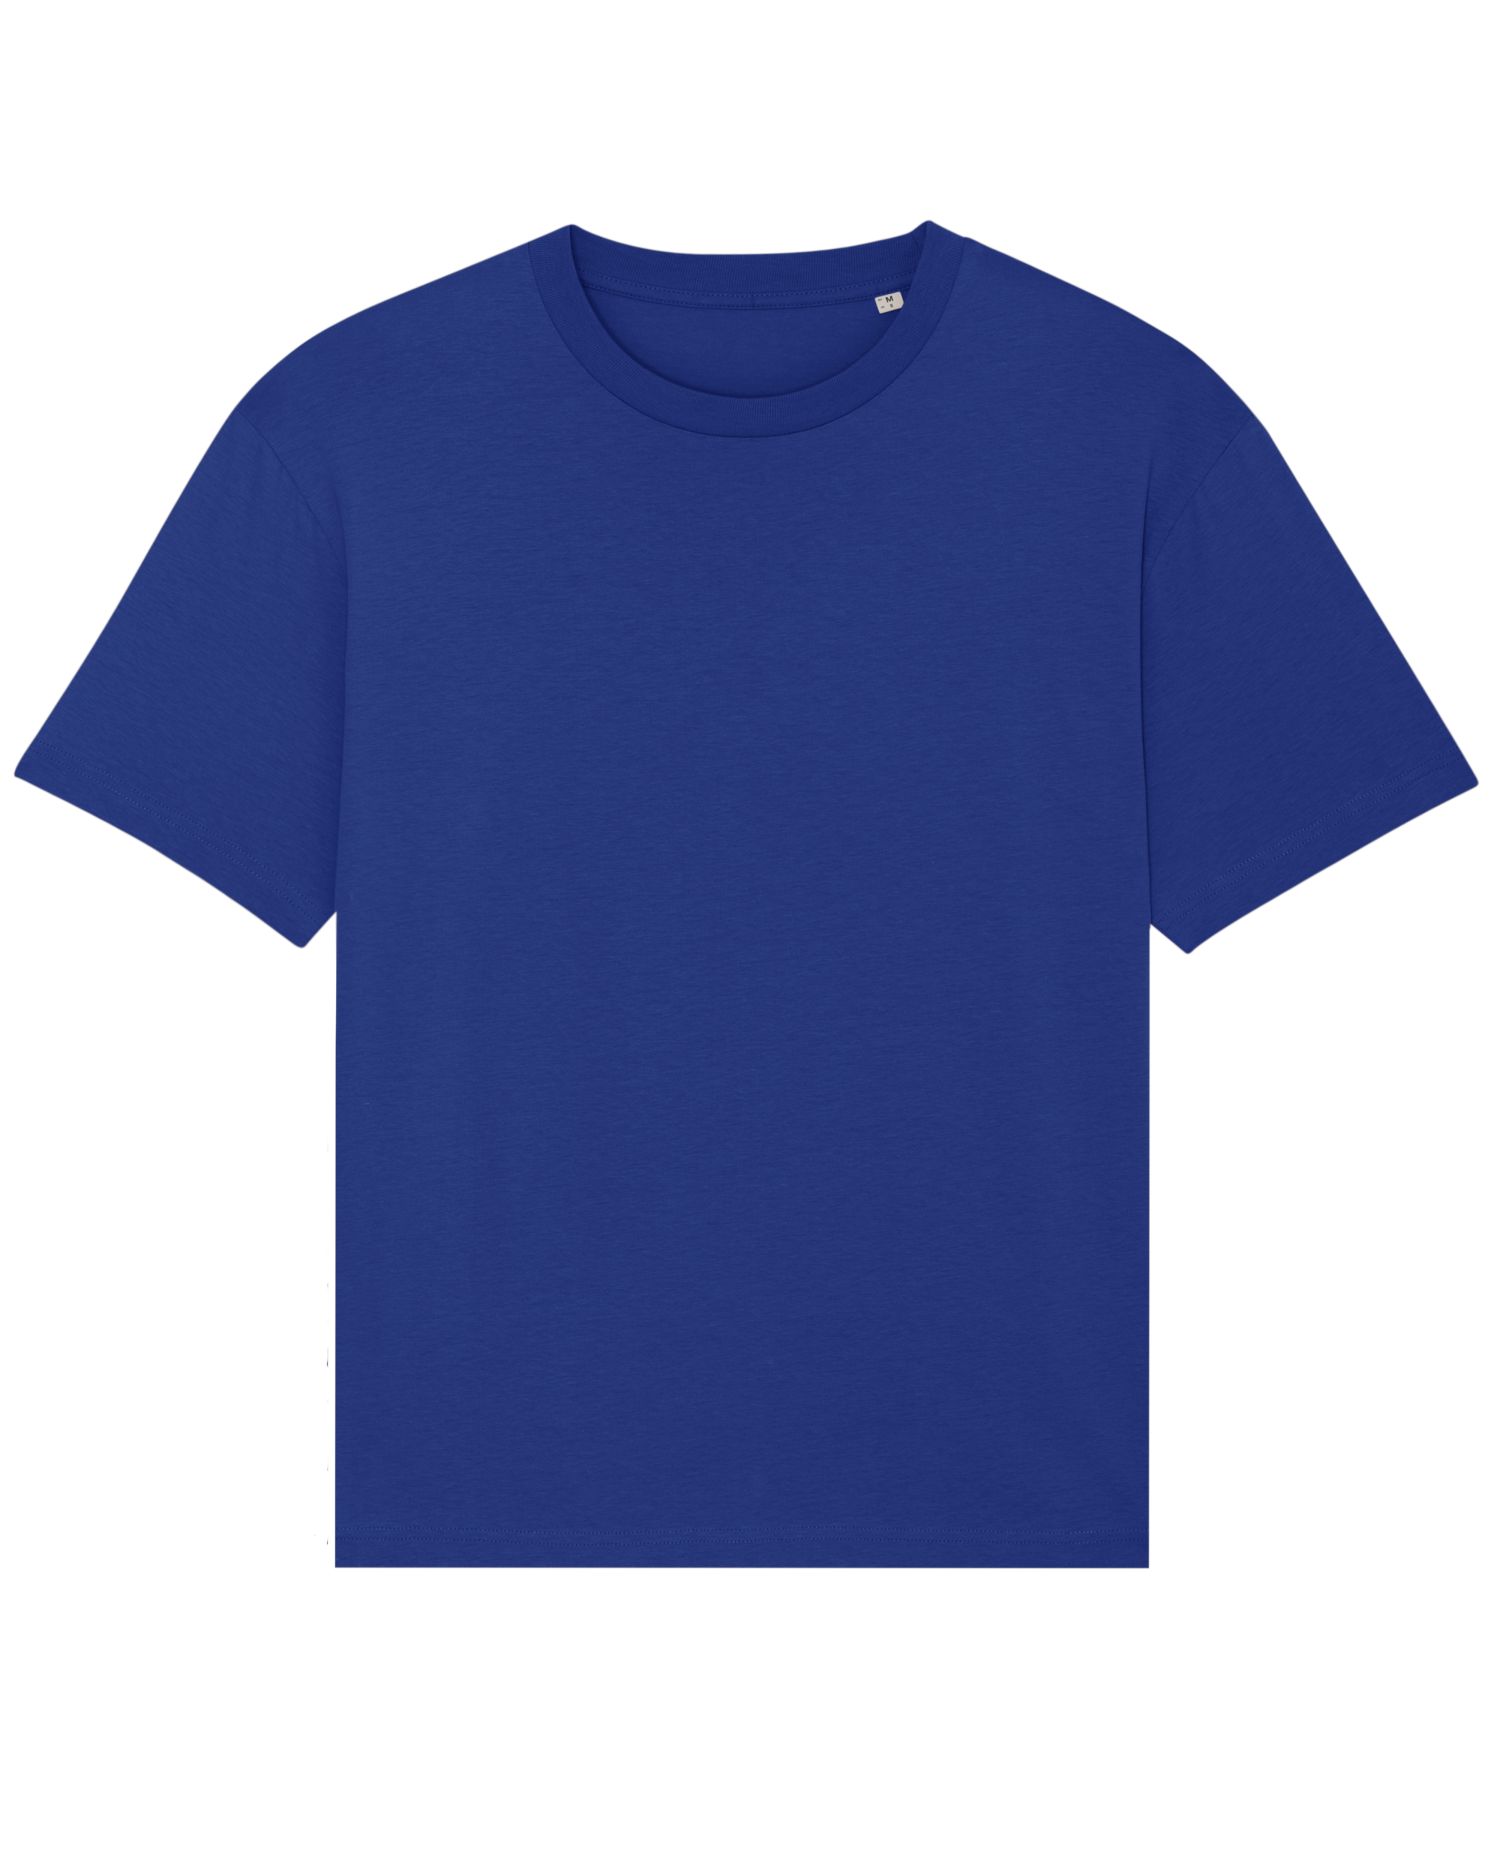 T-Shirt Fuser in Farbe Worker Blue